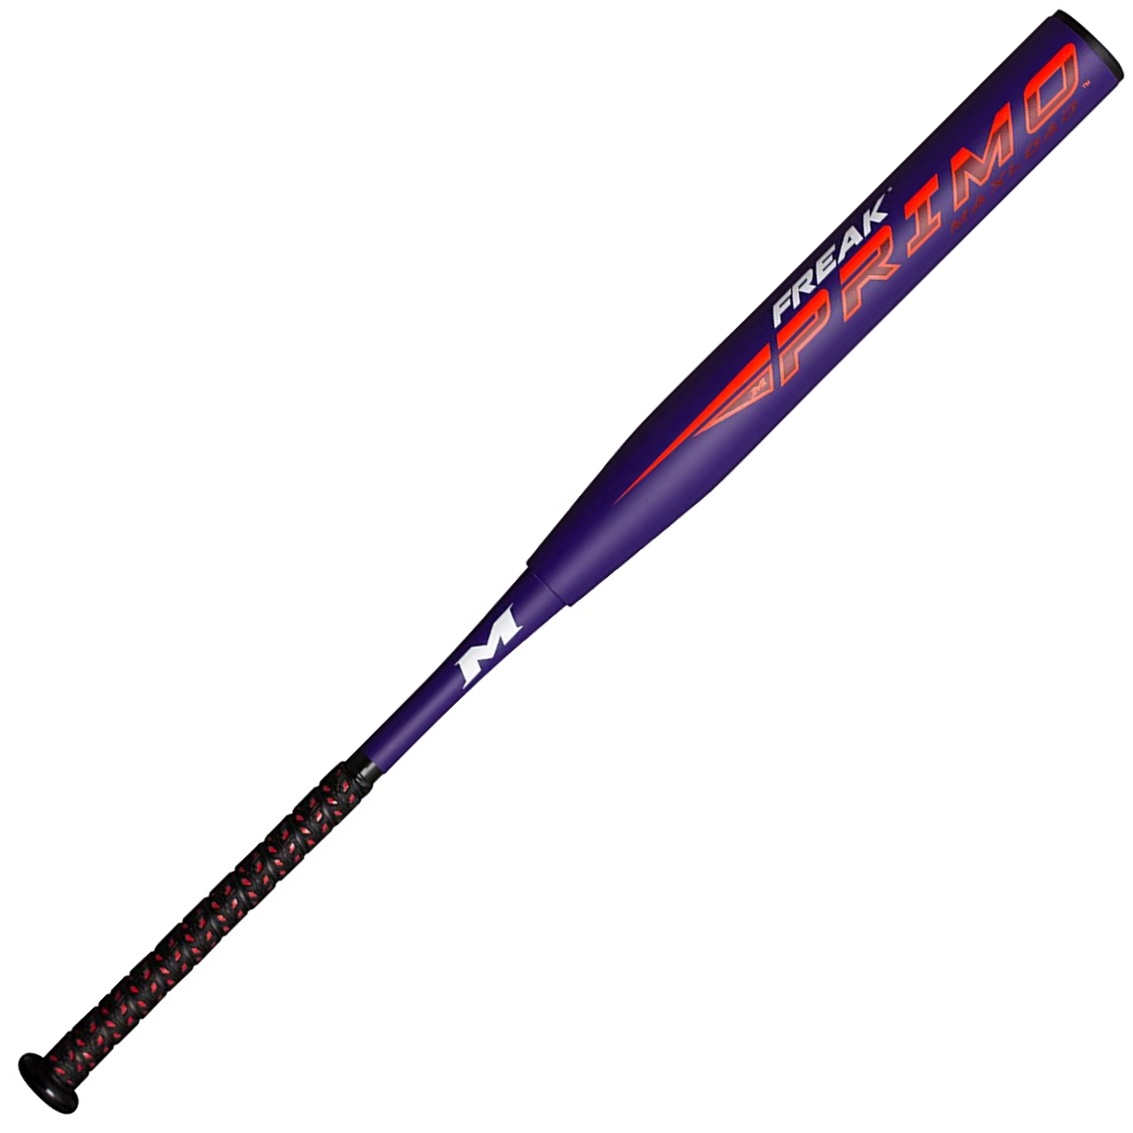 miken-2022-freak-primo-maxload-usssa-slowpitch-softball-bat-14-barrel-34-inch-28-oz MP22MU-3-28 Miken  <h1 id=title class=a-size-large a-spacing-none><span id=productTitle class=a-size-large product-title-word-break>Miken Freak Primo Maxload USSSA